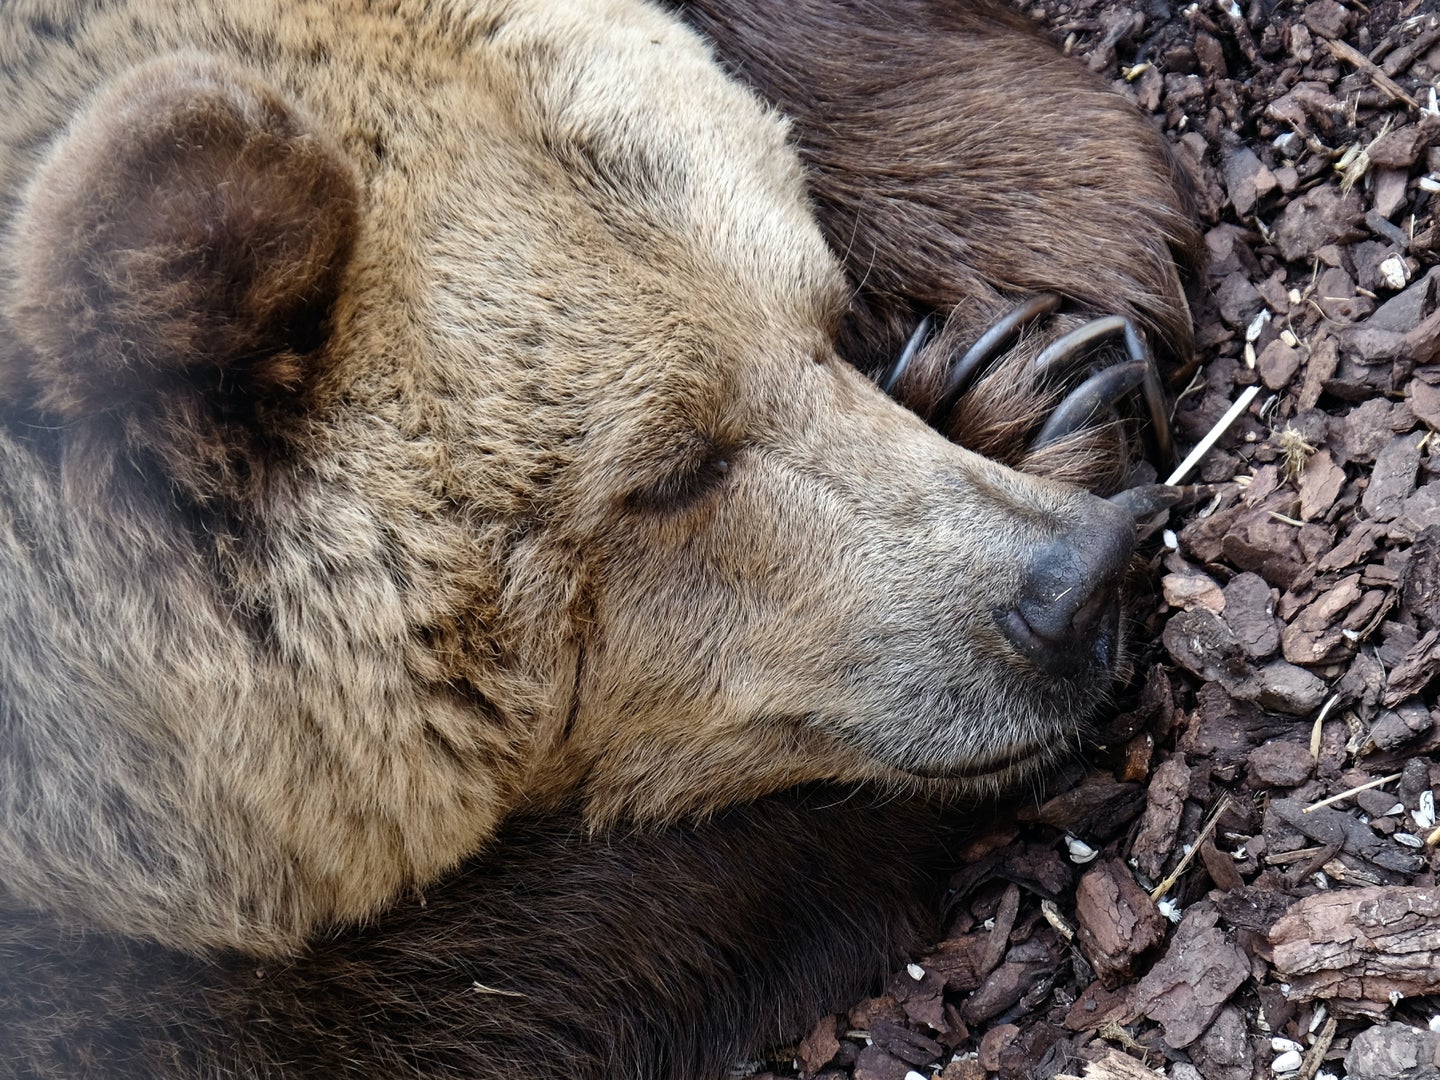 A bear sleeping, maybe after eating its fill of trash.